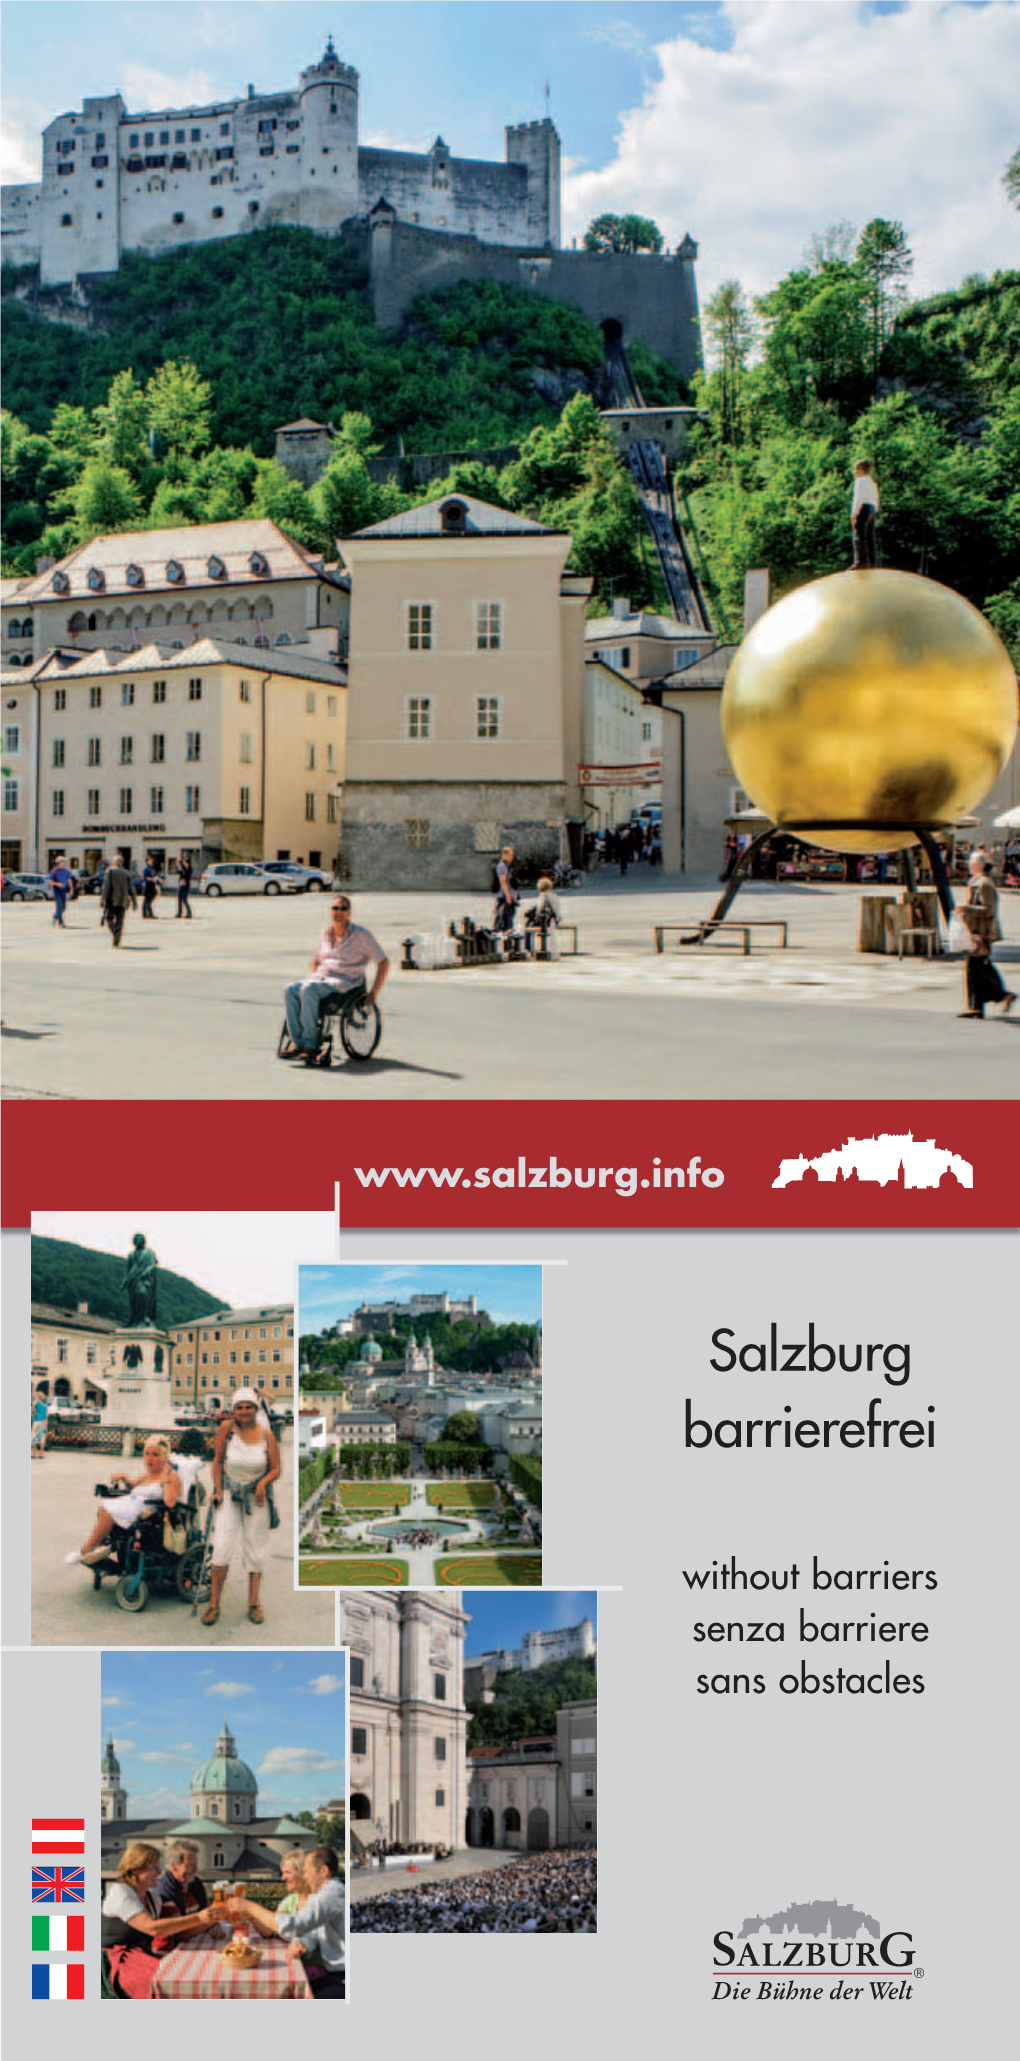 Salzburg Barrierefrei Without Barriers Senza Barriere Sans Obstacles Bmpjt